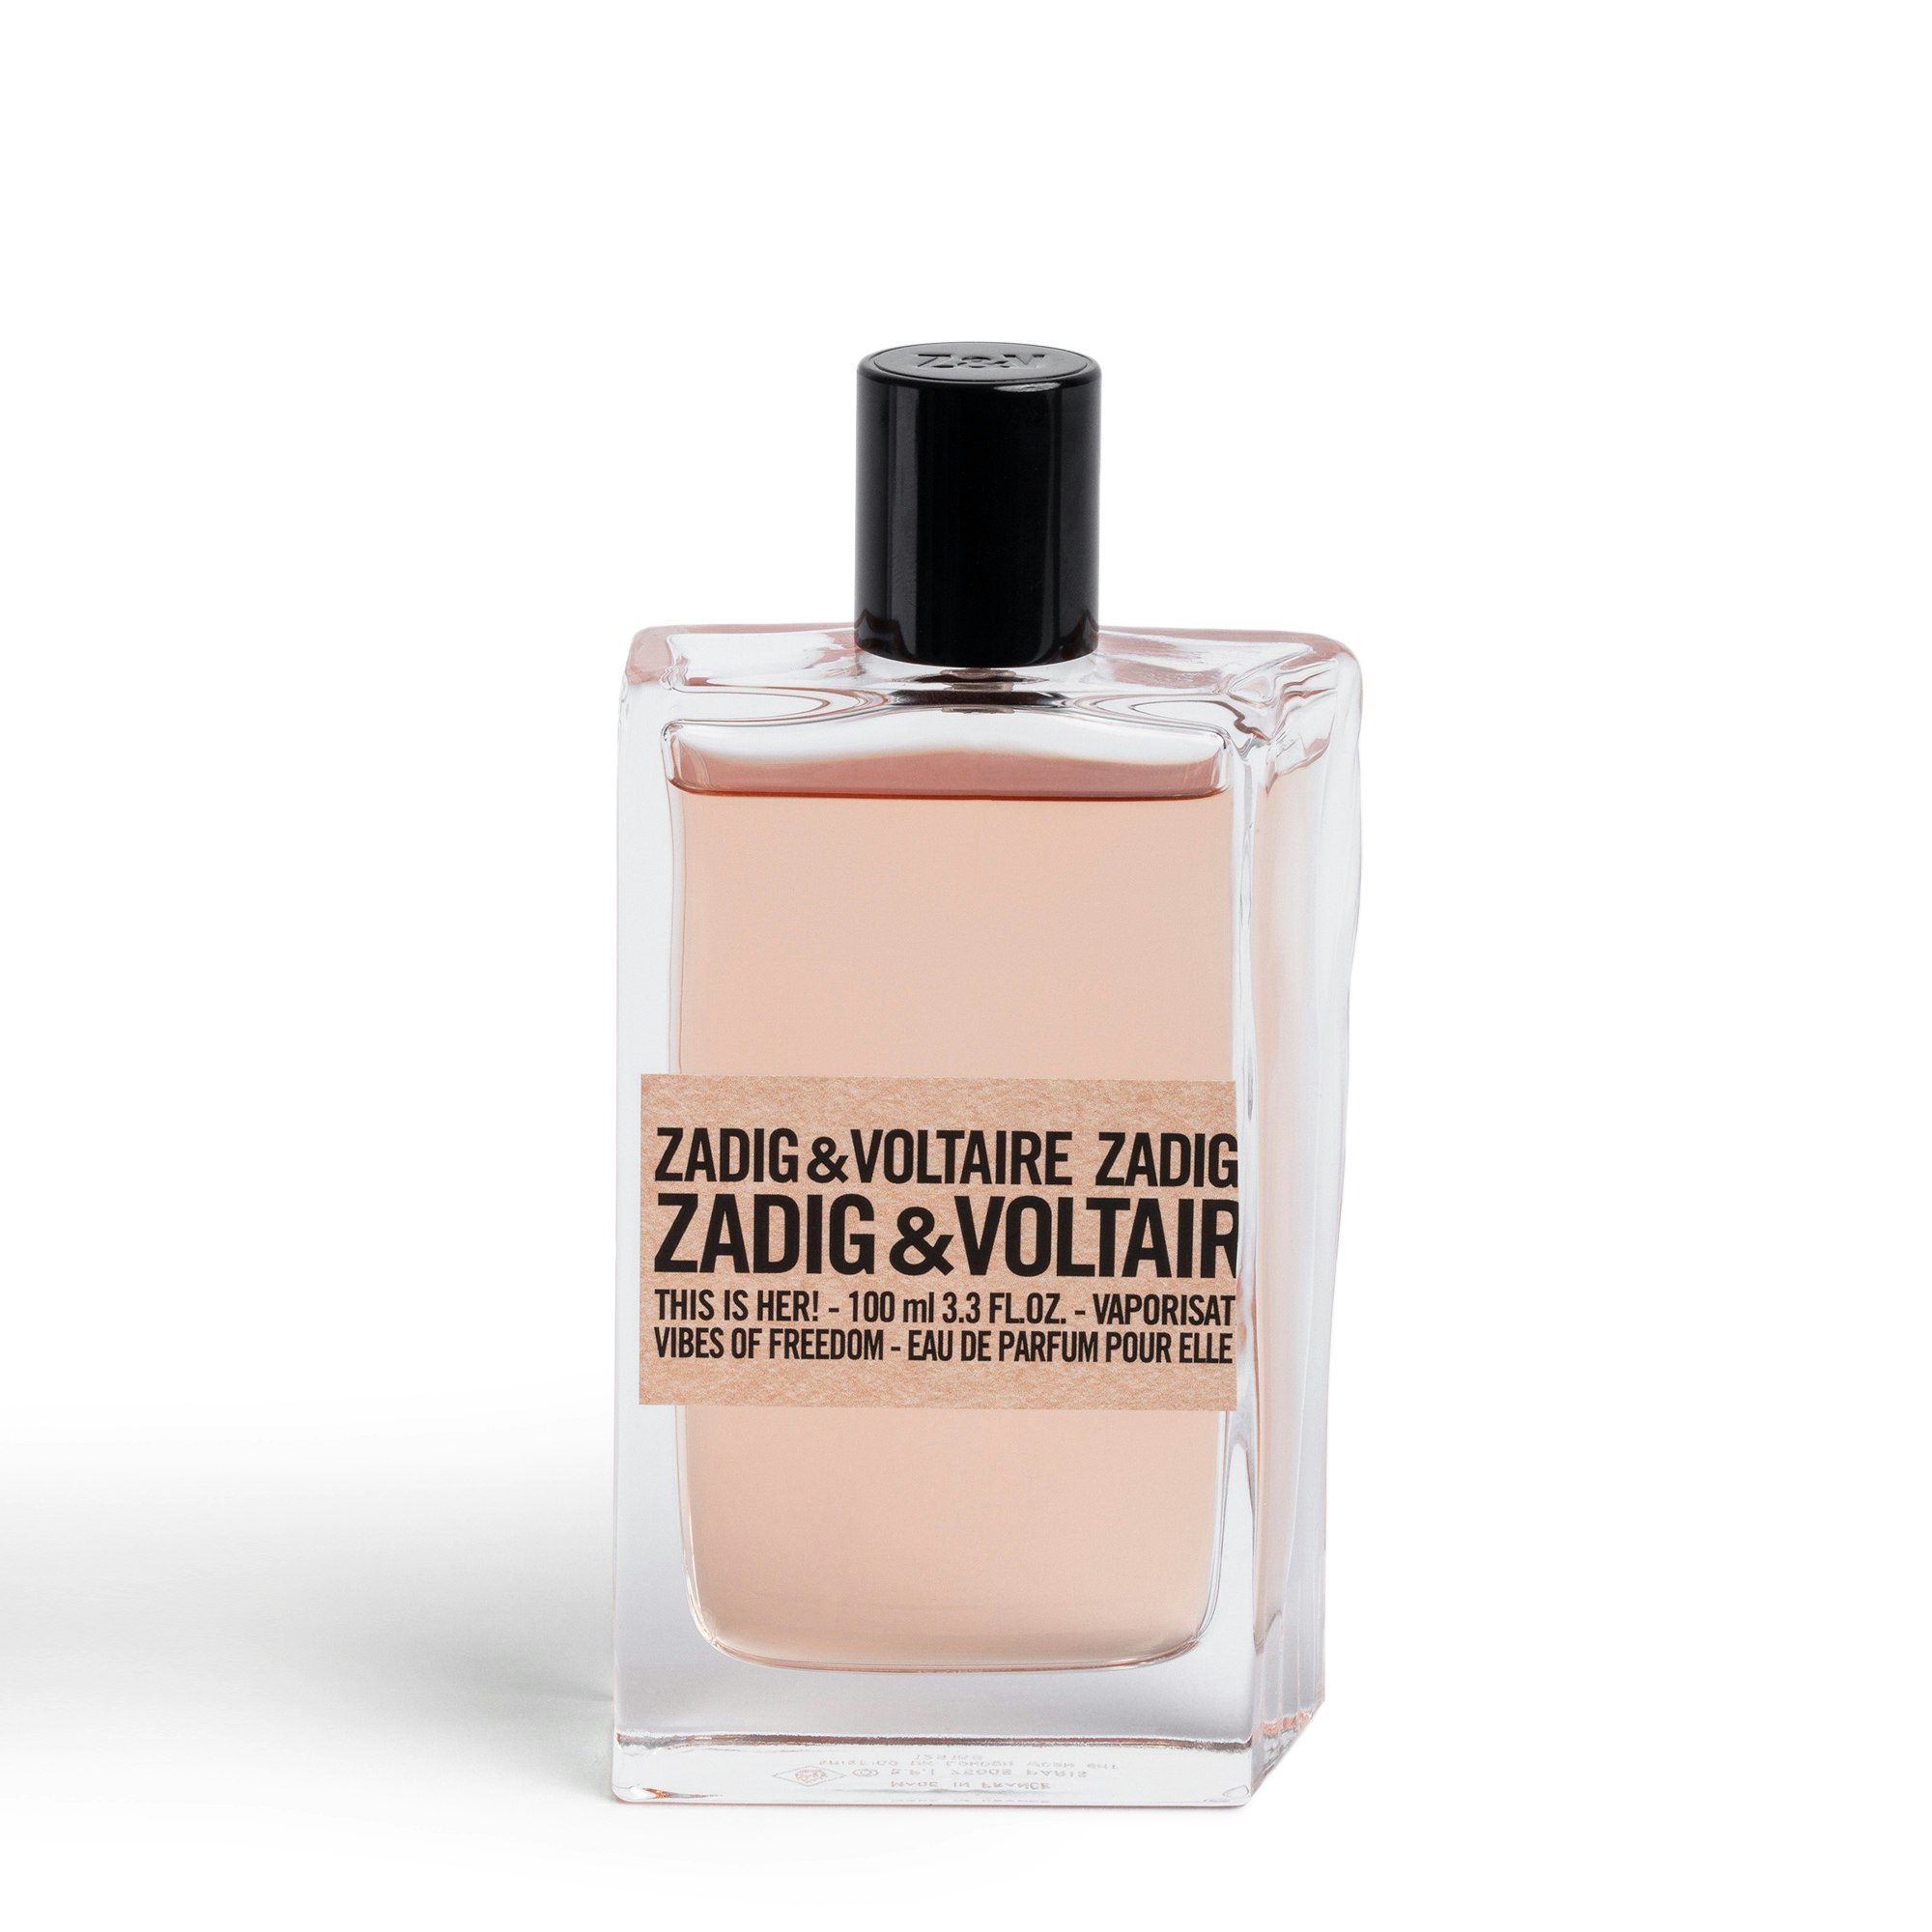 Parfüm This Is Her! Vibes Of Freedom 100ml - Zadig & Voltaire